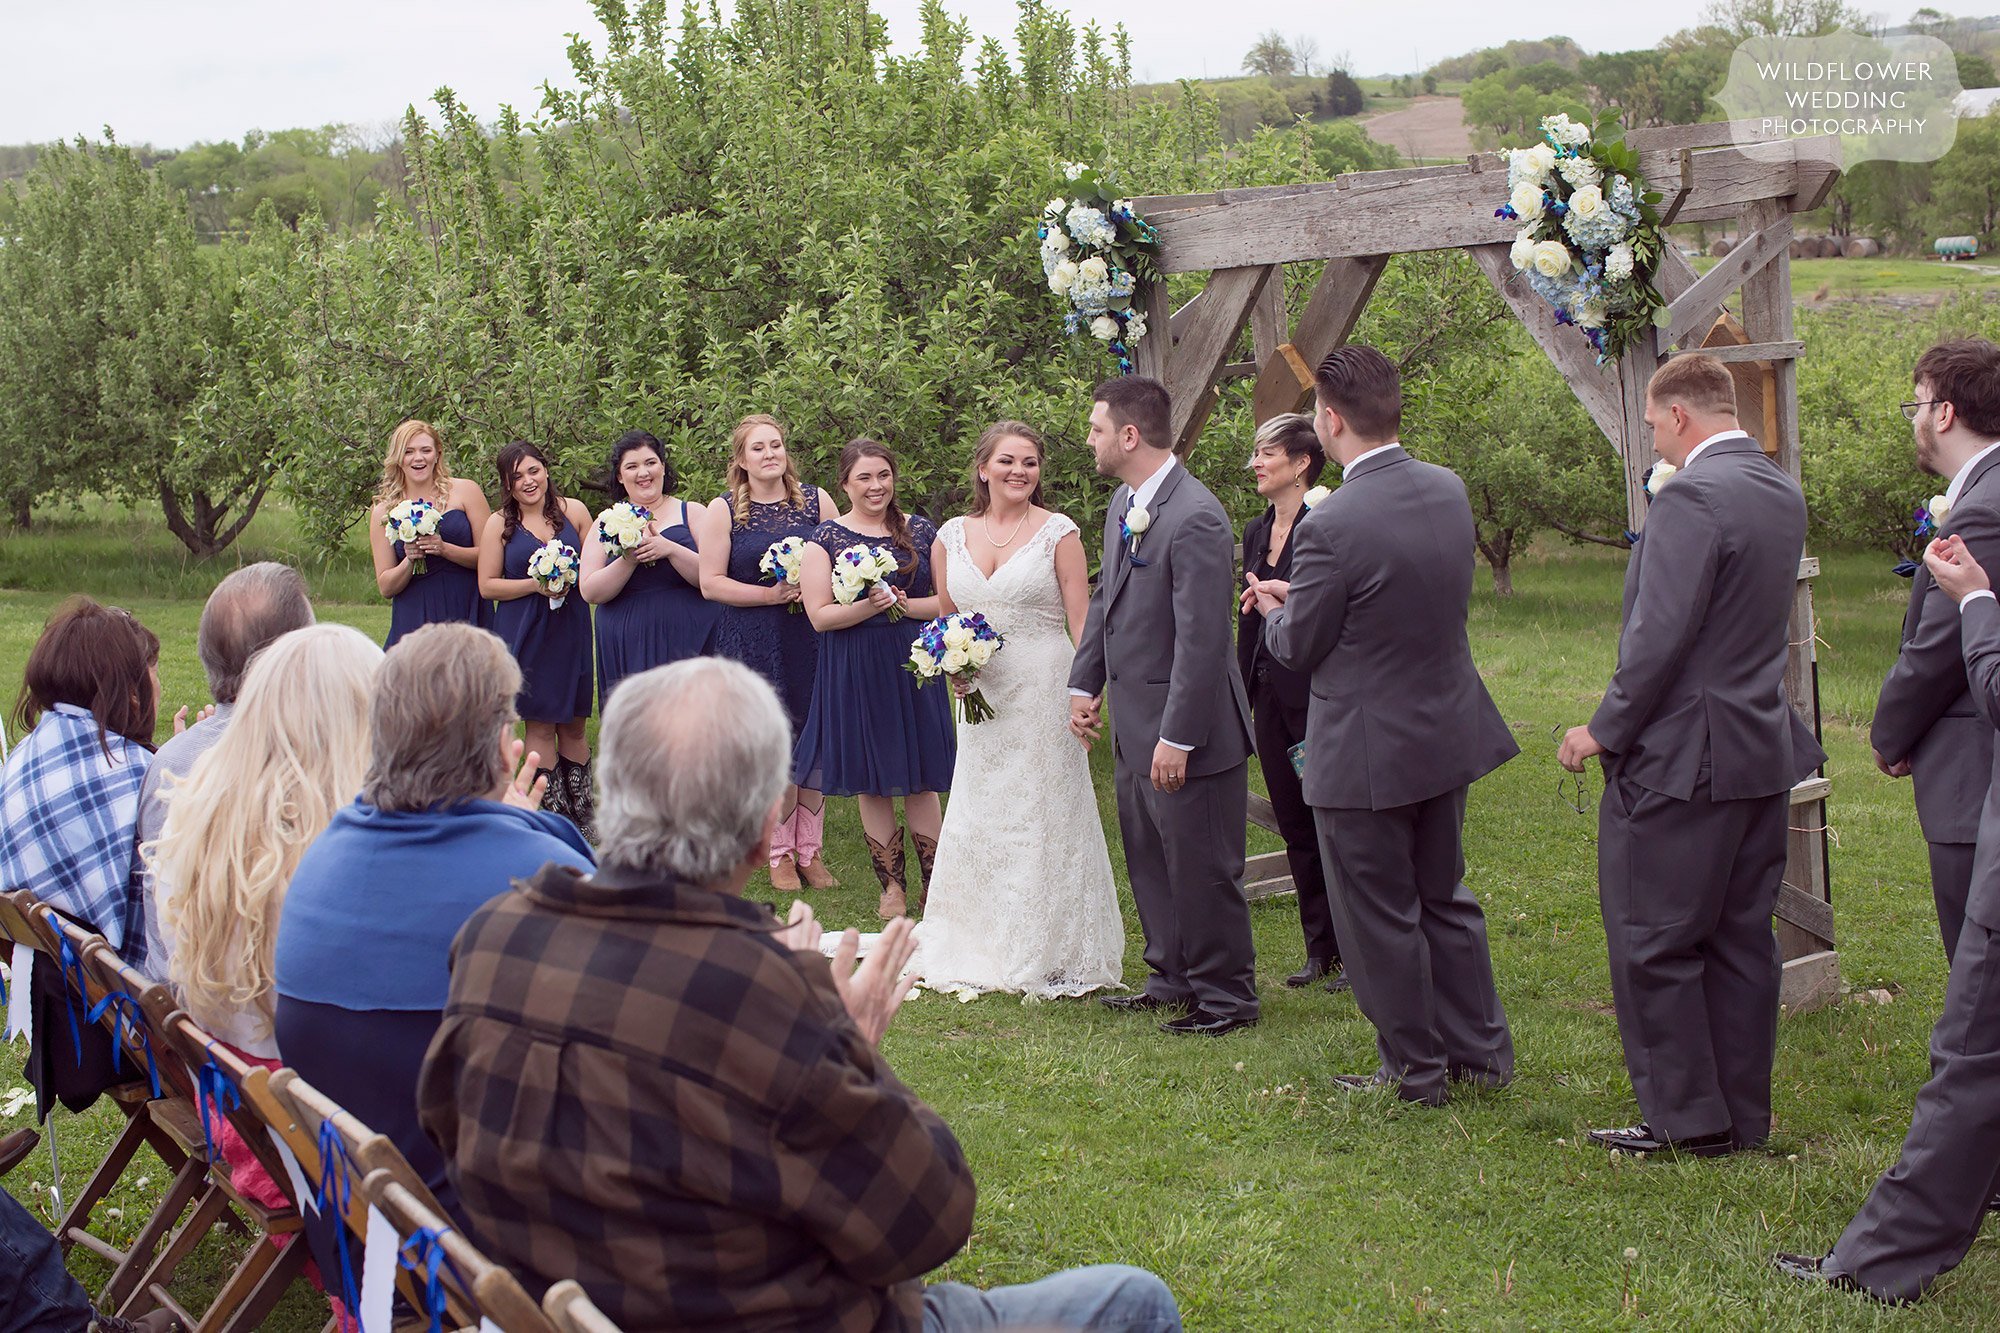 Outdoor wedding ceremony in the orchard in KC.